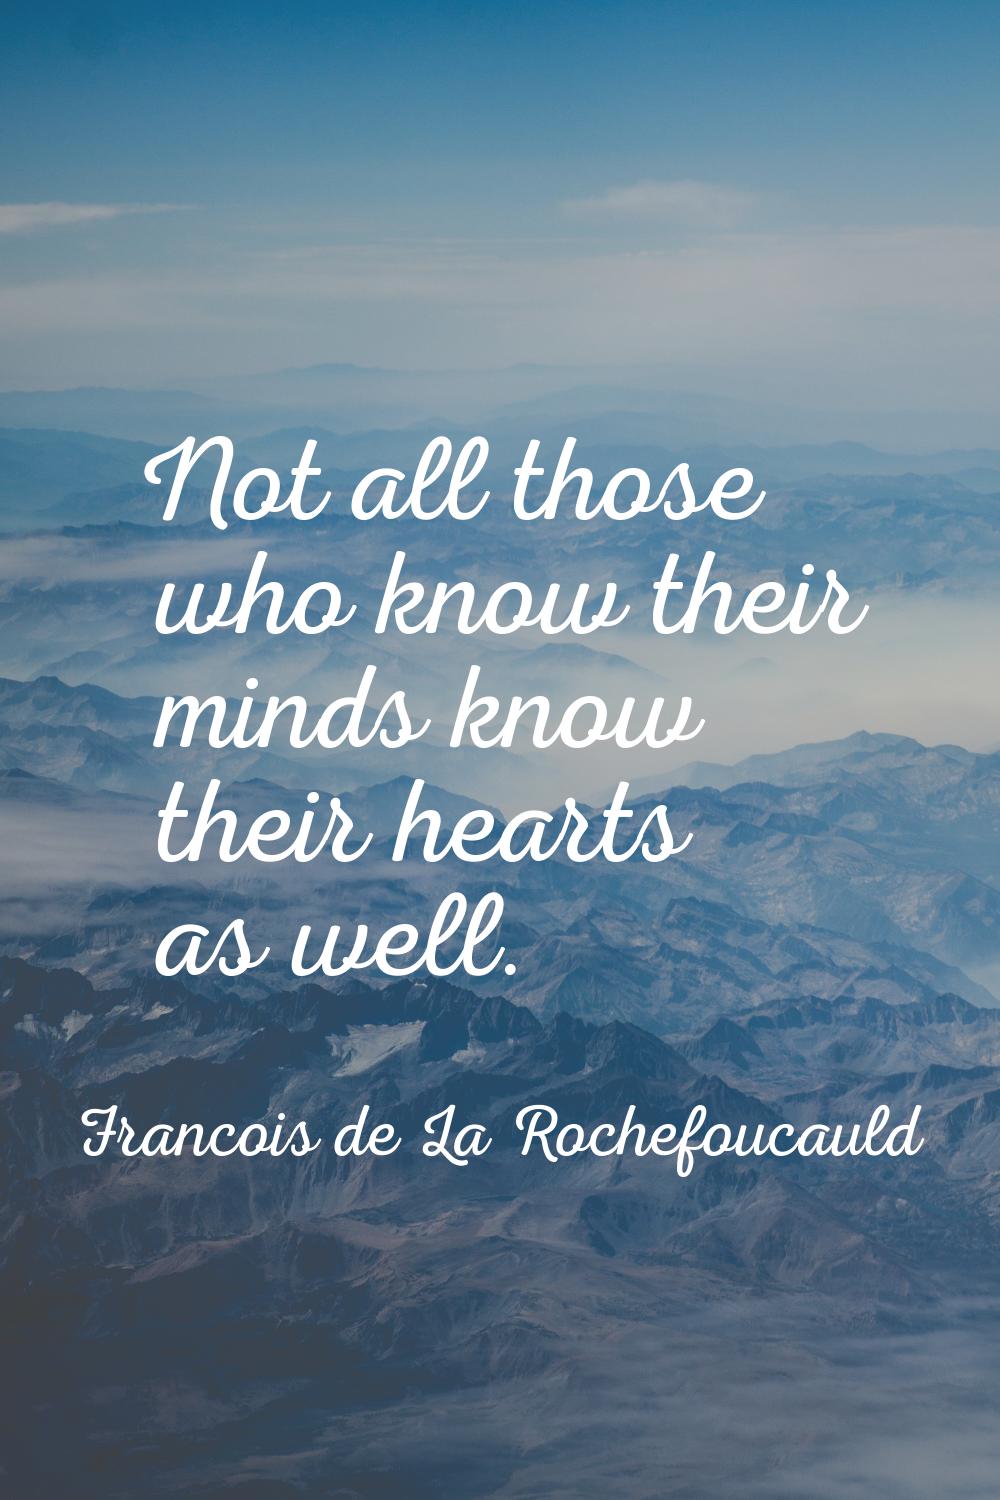 Not all those who know their minds know their hearts as well.